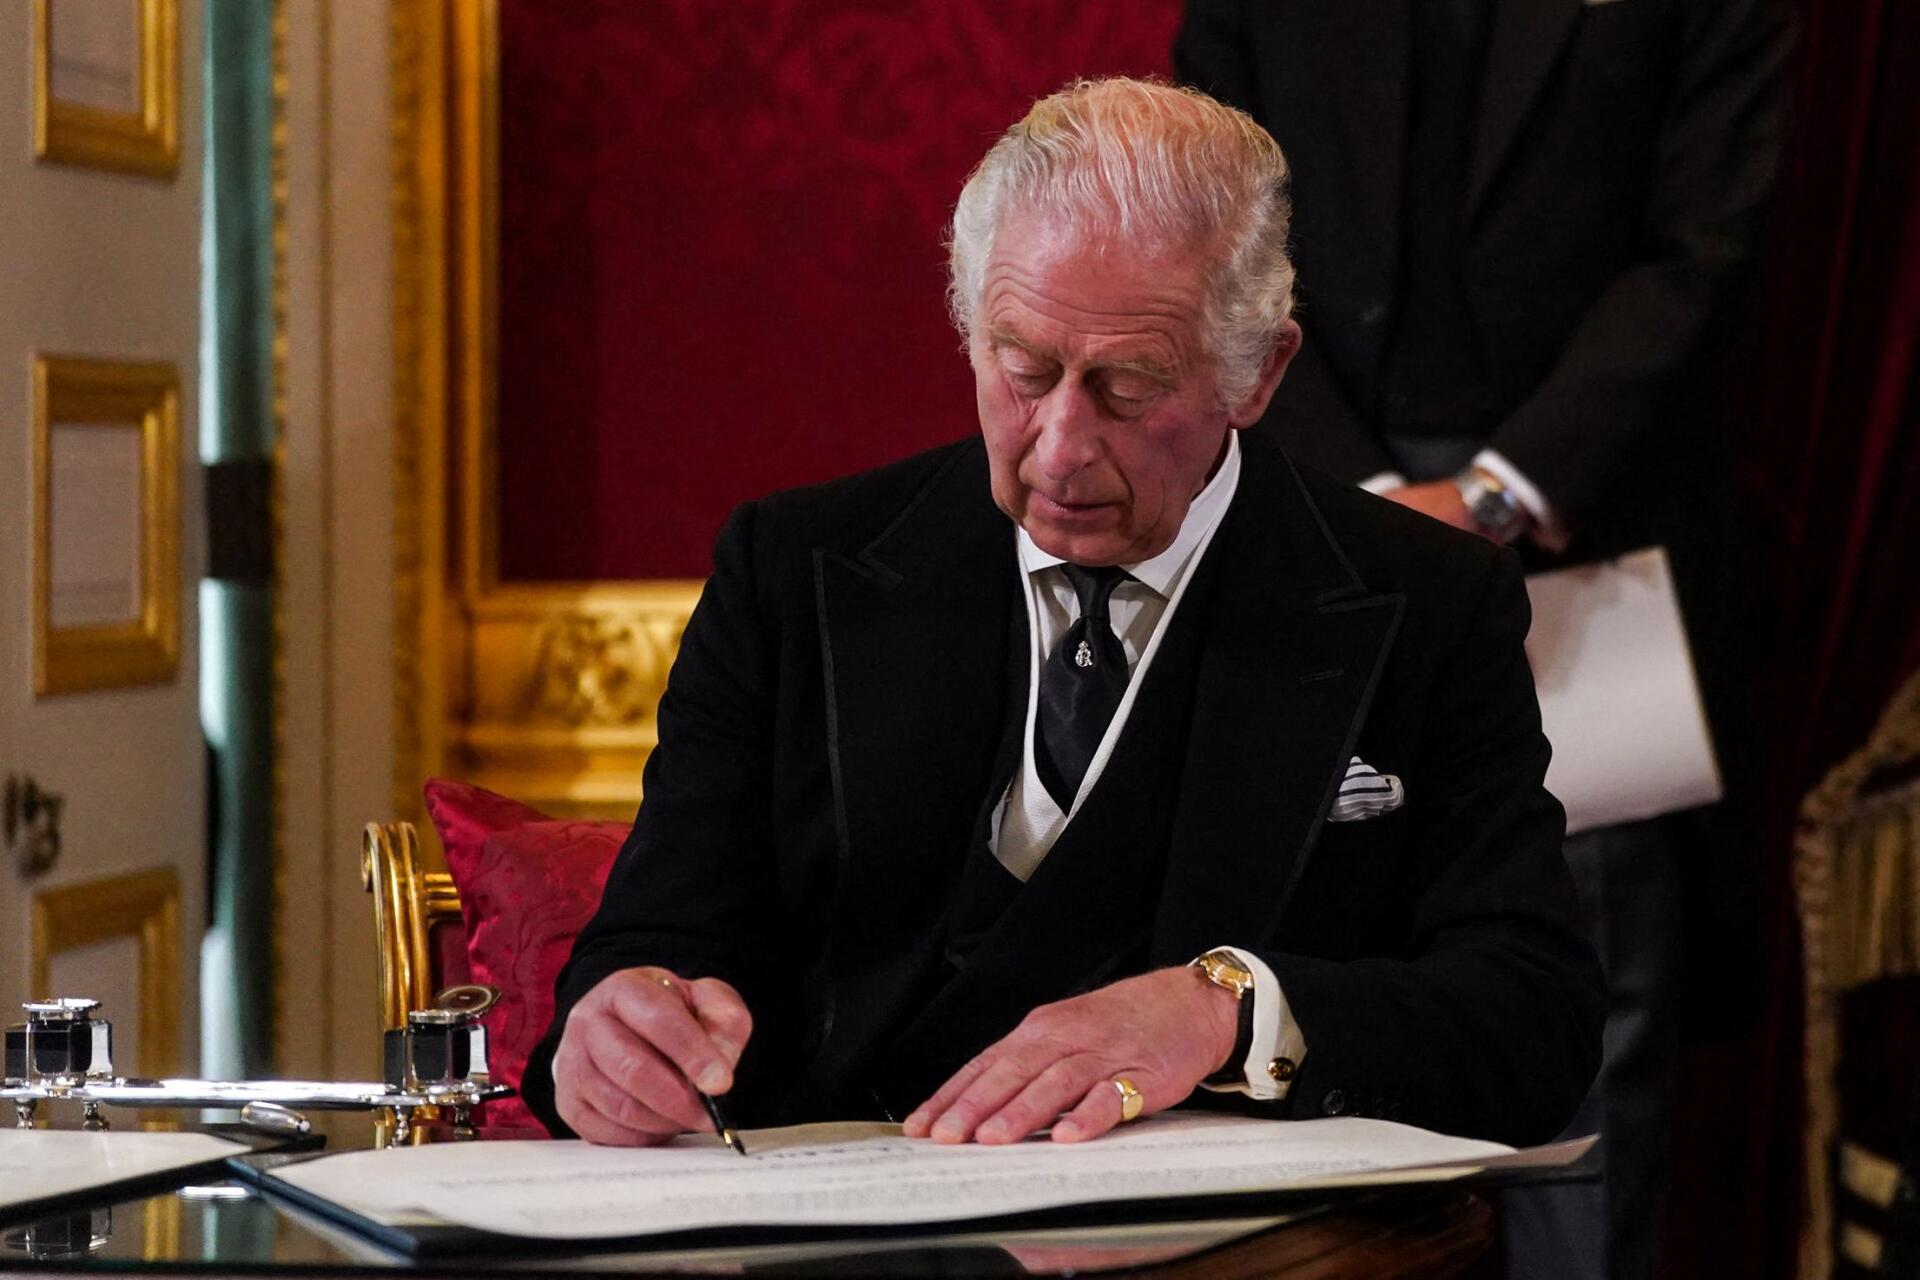 Charles III signs an oath to ensure the security of the Anglican Church of Scotland at the meeting of the Council of Accession proclaiming his accession to the throne at St James's Palace in London on September 10, 2022.